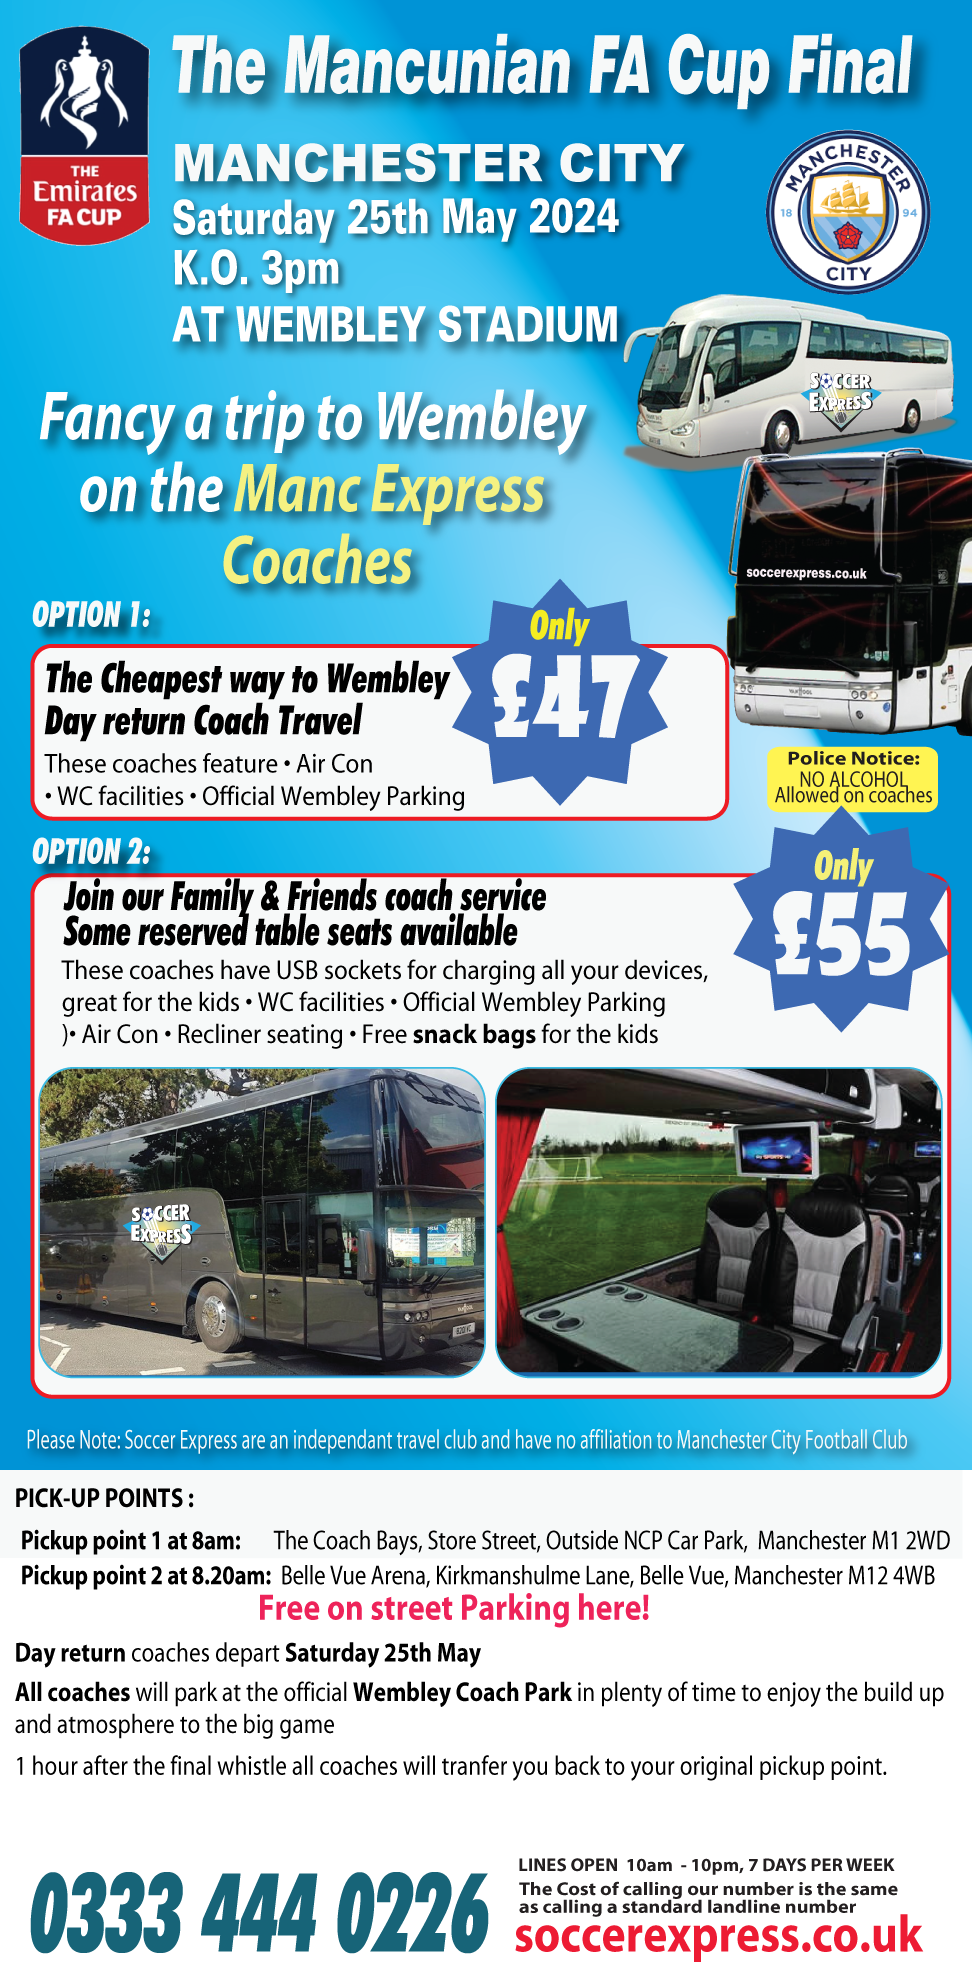 The Mancunian FA Cup Final Manchester City Coach Travel to Wembley Stadium Saturday 25rh May 2024. OPTION 1. The Cheapest way  to Wembley Stadium 
Only  £47. These Coaches feature: Air Con. WC facilities, Recliner Seating, Official Wembley Parking. OPTION 2. Only £55, Join our Family & Friends Coach service, Some reserved table seats. These Coaches have USB sockets for Charging all your devices, great for the kids. Recliner Seating. toilet Facilities. Air Con. Free Snack bag for the Kids. 
PICK-UP POINTS :
Pickup point 1  at 8am:  The Coach Bays, Store Street, Outside NCP Car Park,  Manchester M1 2WD
Pickup point 2 at 8.20am:  Belle Vue Arena, Kirkmanshulme Lane, Belle Vue, Manchester M12 4WB
				Free on street Parking here
Day return coaches depart Saturday 25th May
These times/dates/pick-up points are to be confirmed 
All coaches will park at the official Wembley Coach Park in plenty of time to enjoy the build up and atmosphere to the big game
1 hour after the final whistle all coaches will tranfer you back to your original pickup point.
 . <div class=